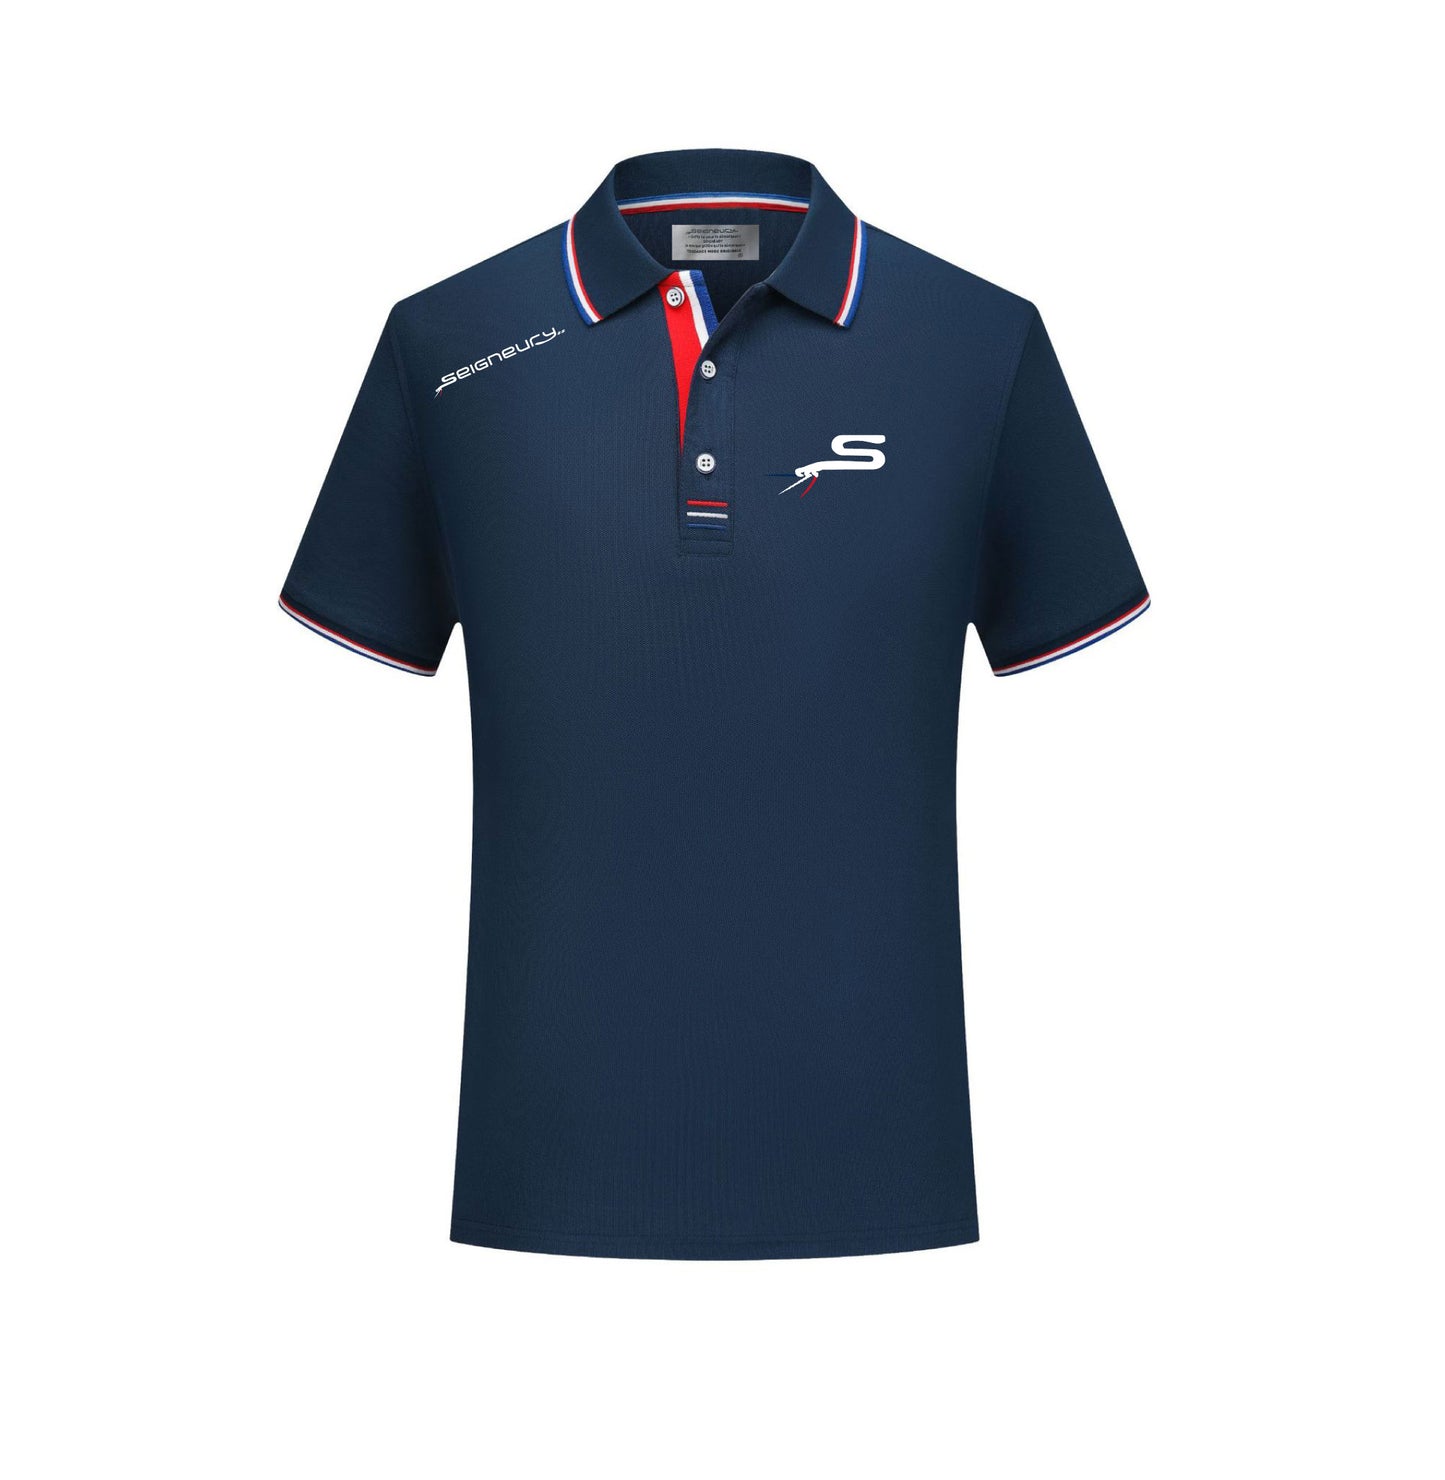 Polo golf tennis manches courtes logo broder gamme ARGENT olympe